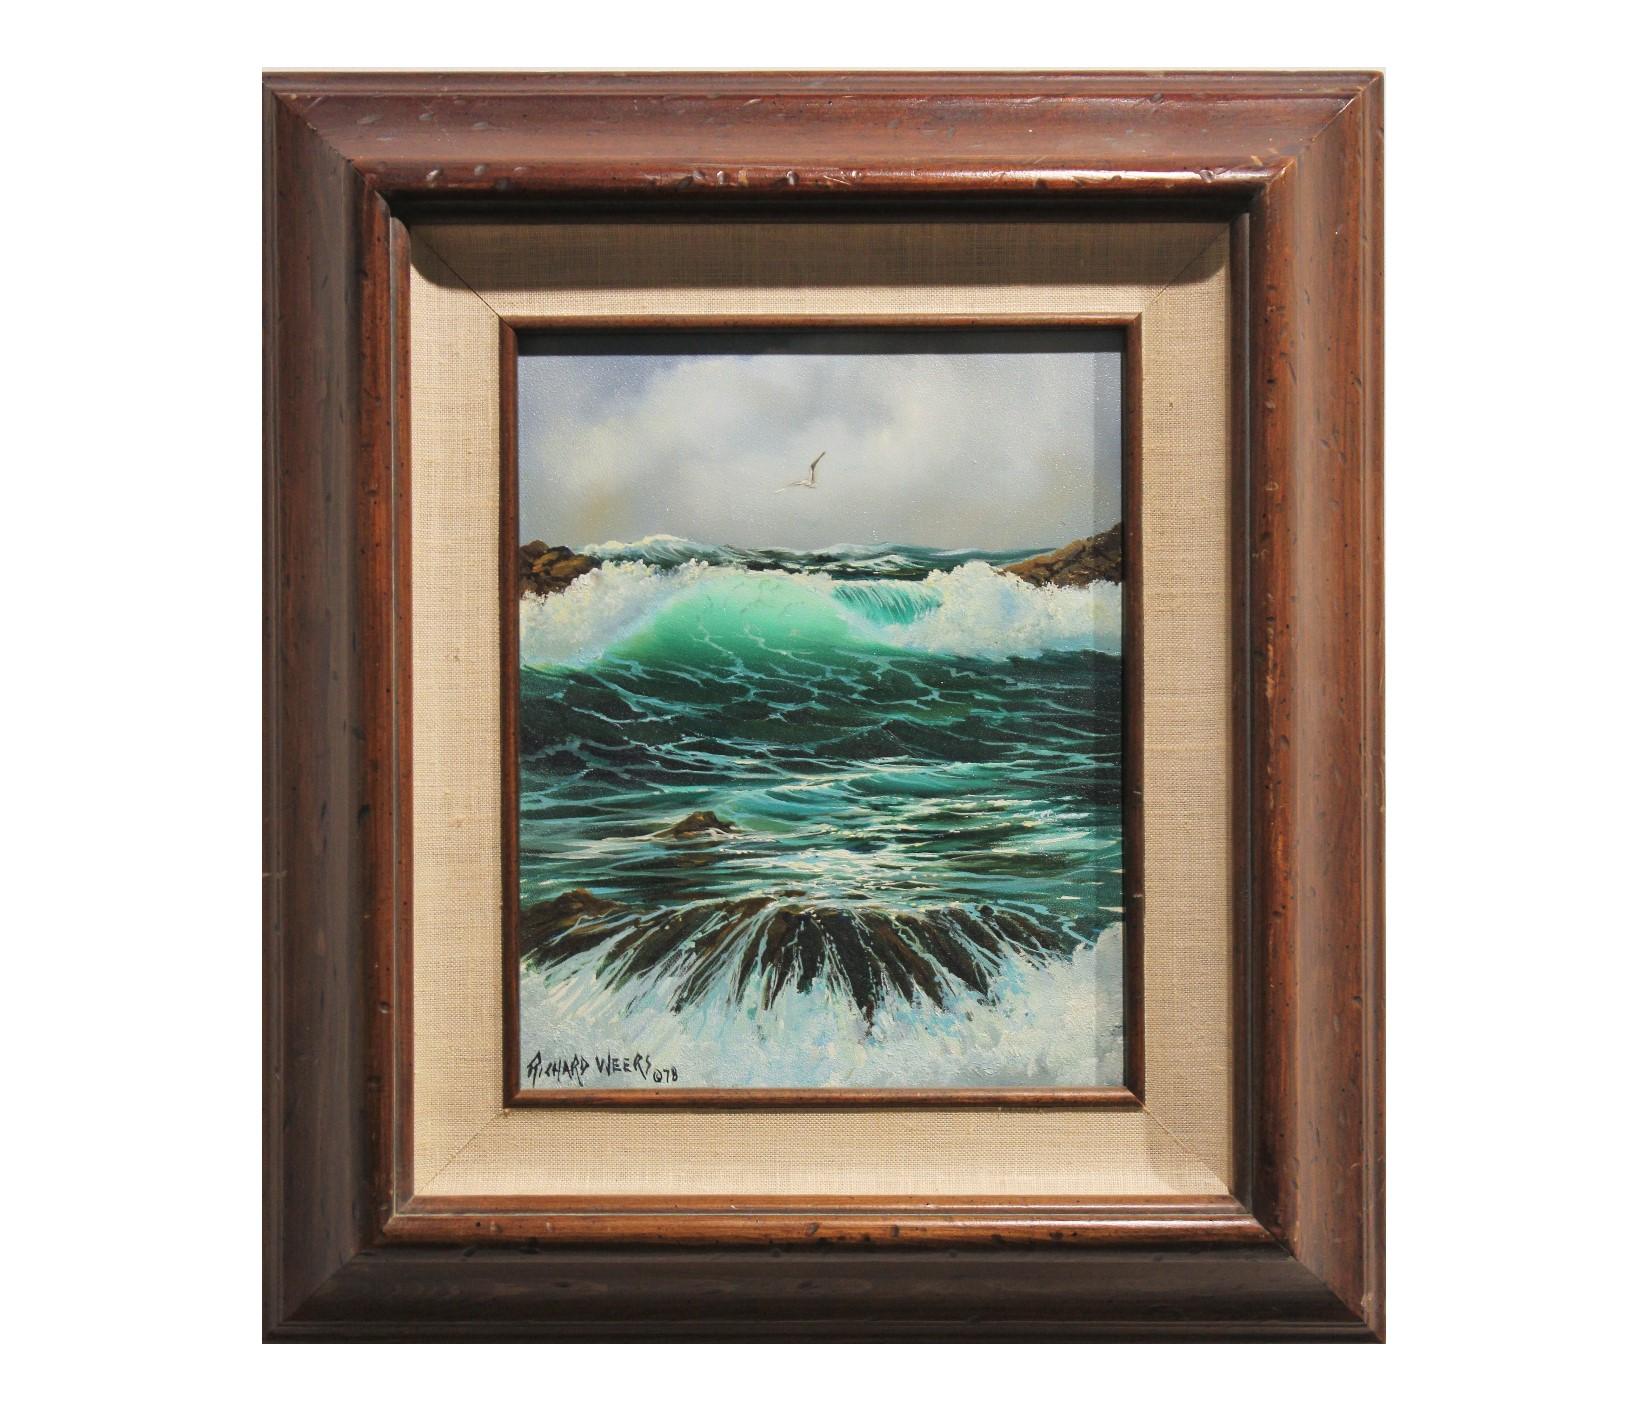 Stormy Seascape with Seagull Flying and Crashing Waves - Painting by Richard Weers